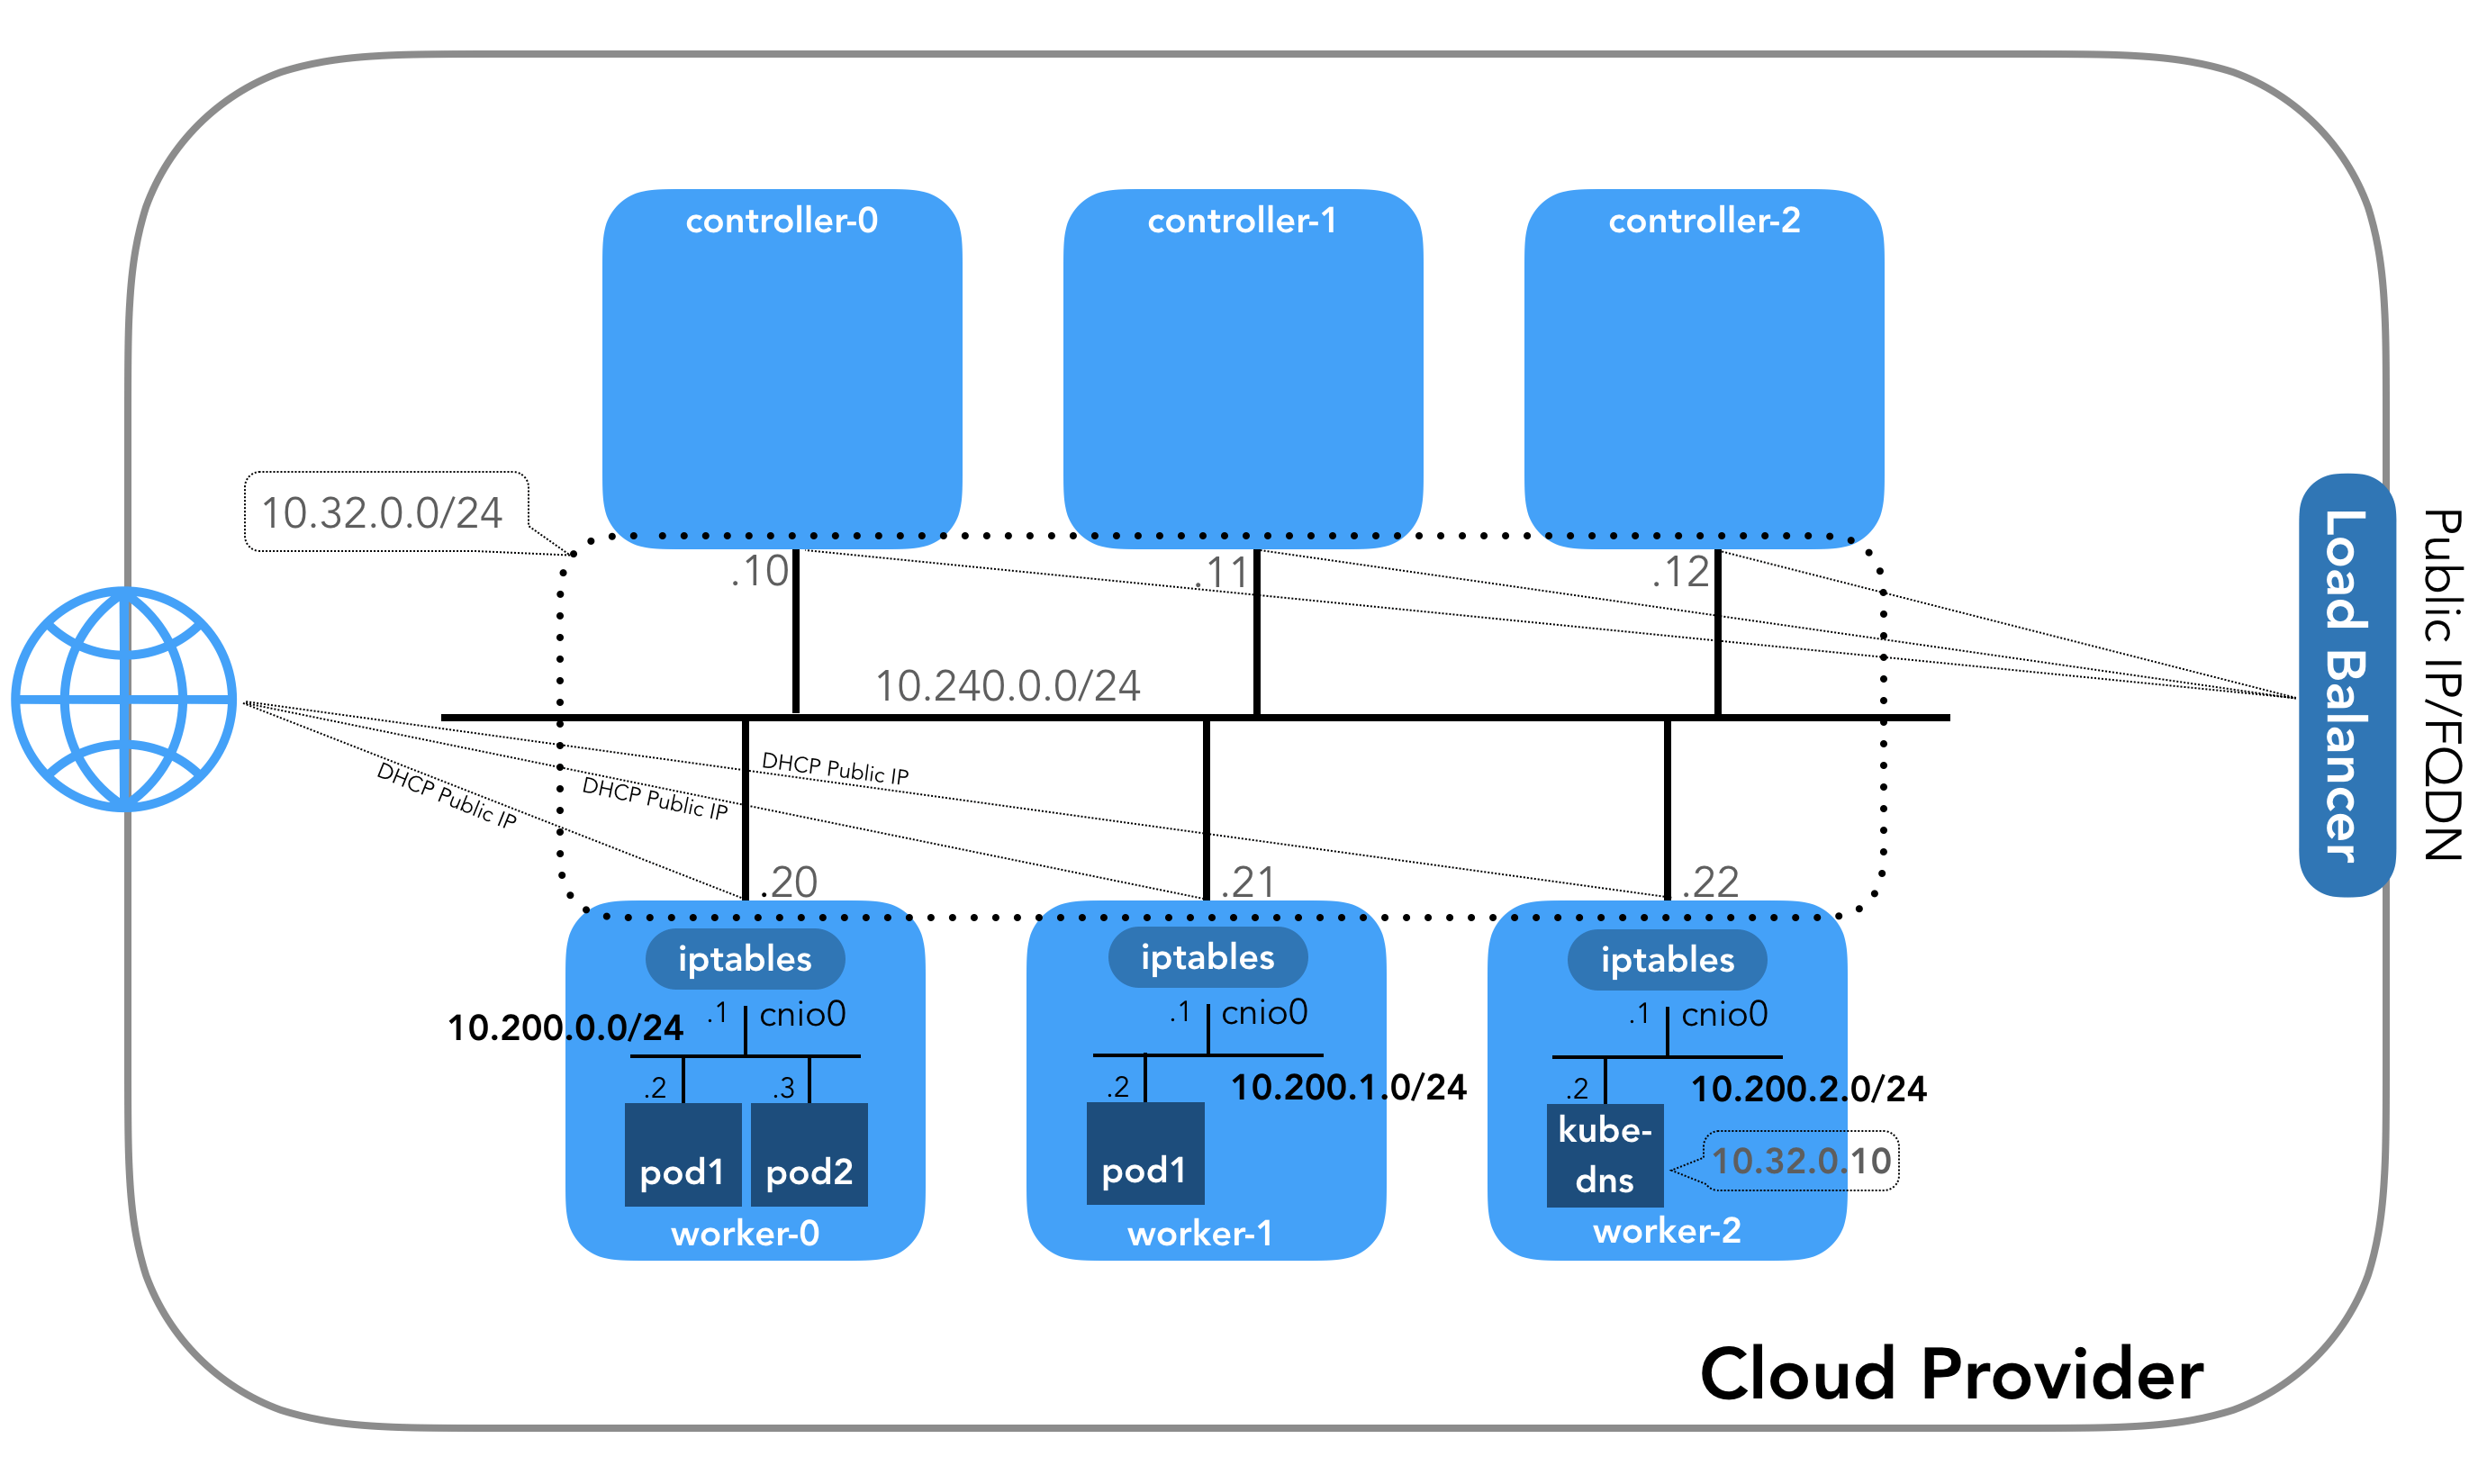 This image depicts kubernetes networking digram of controller-0, controller-1, controller-2 and worker-0, worker-1, and worker-2 connected through the same network.